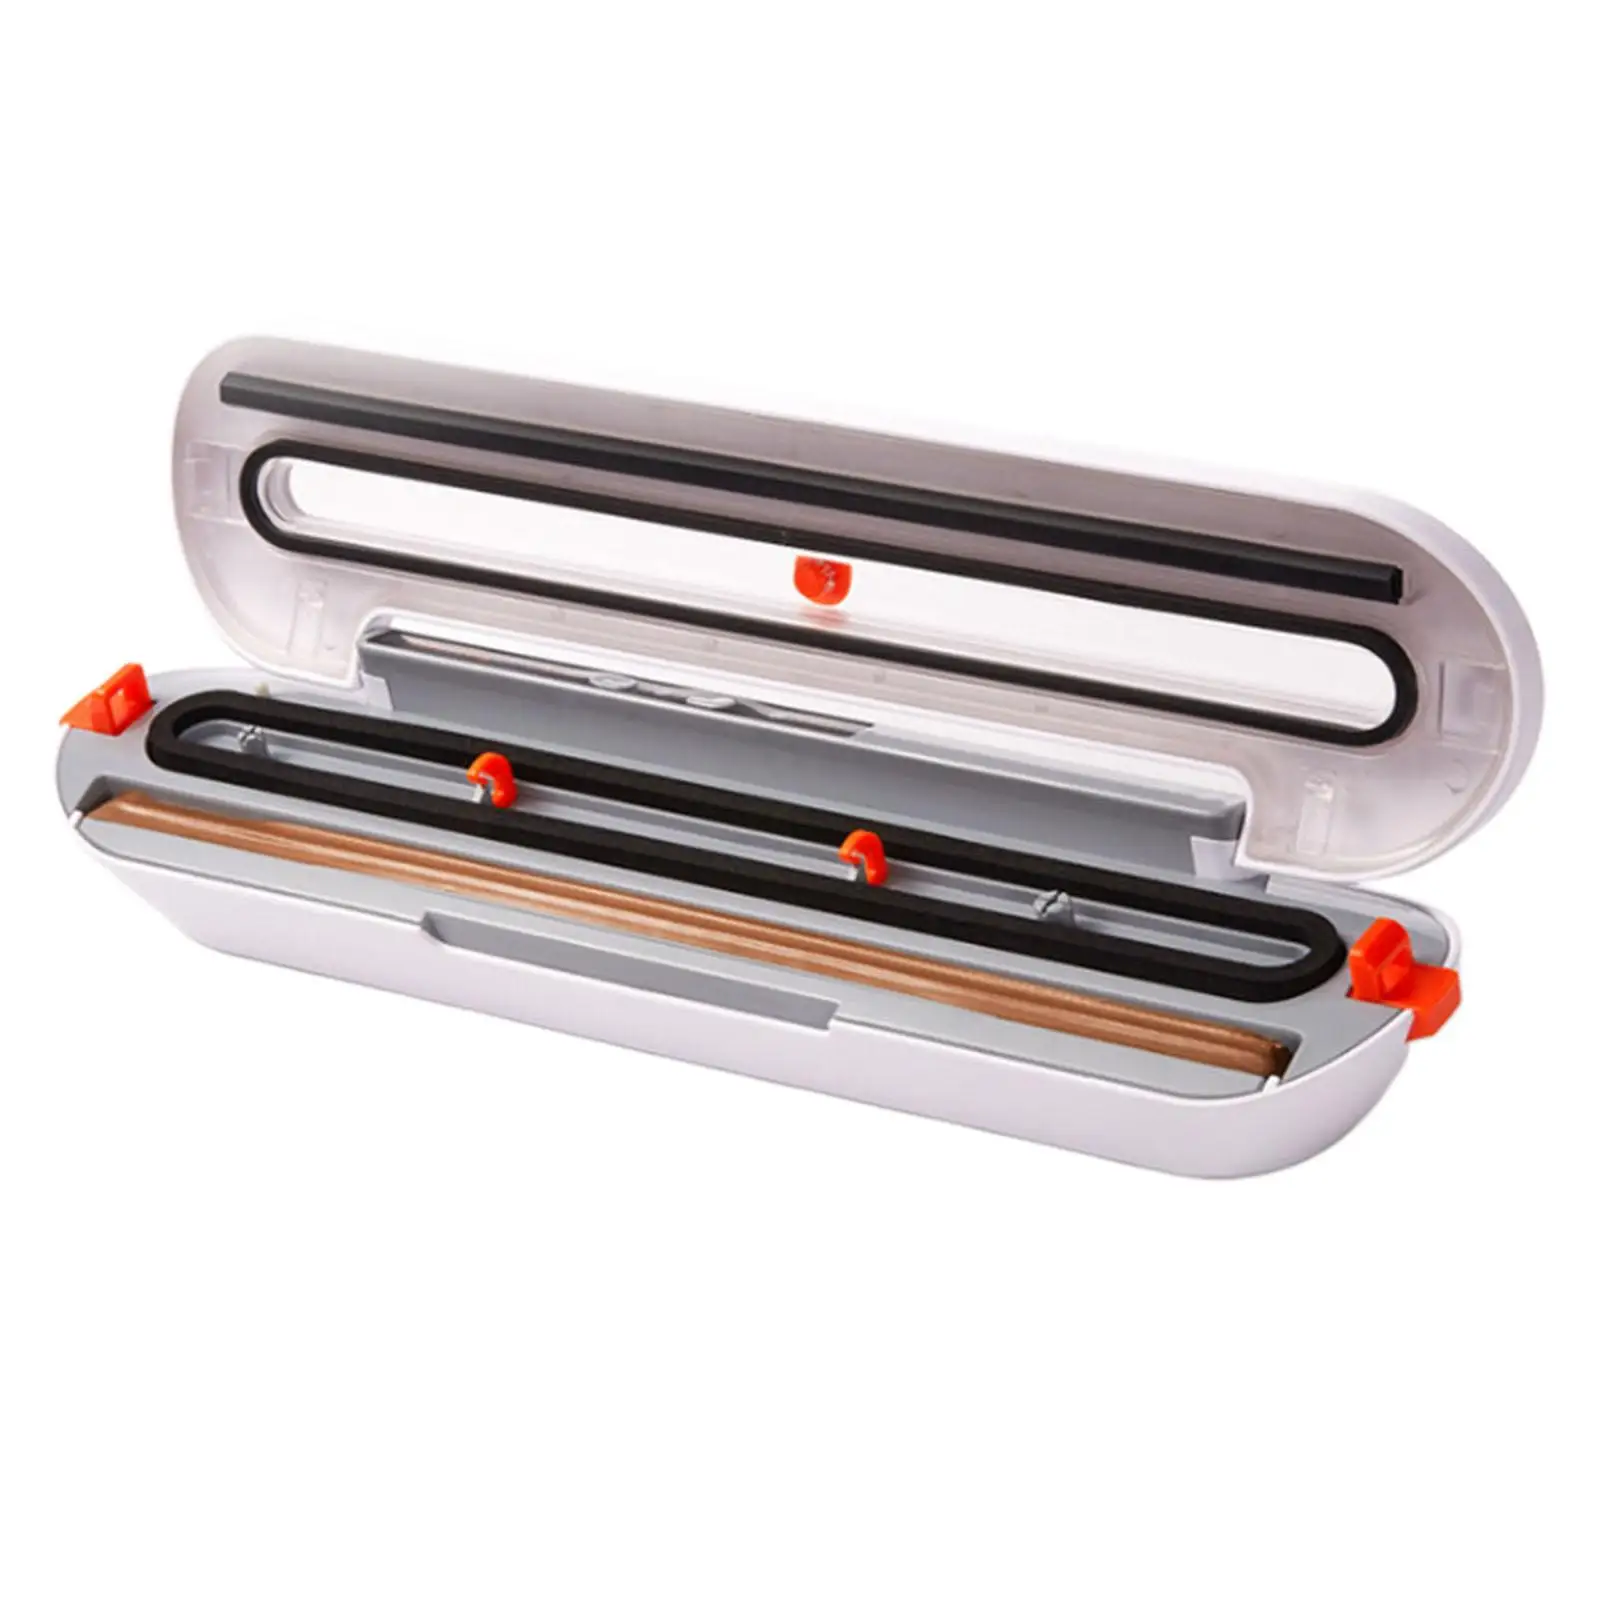 Home Use Electric Vacuum Sealer Food Packaging Preservation Sealing Machine EU Plug With 10pcs Bags